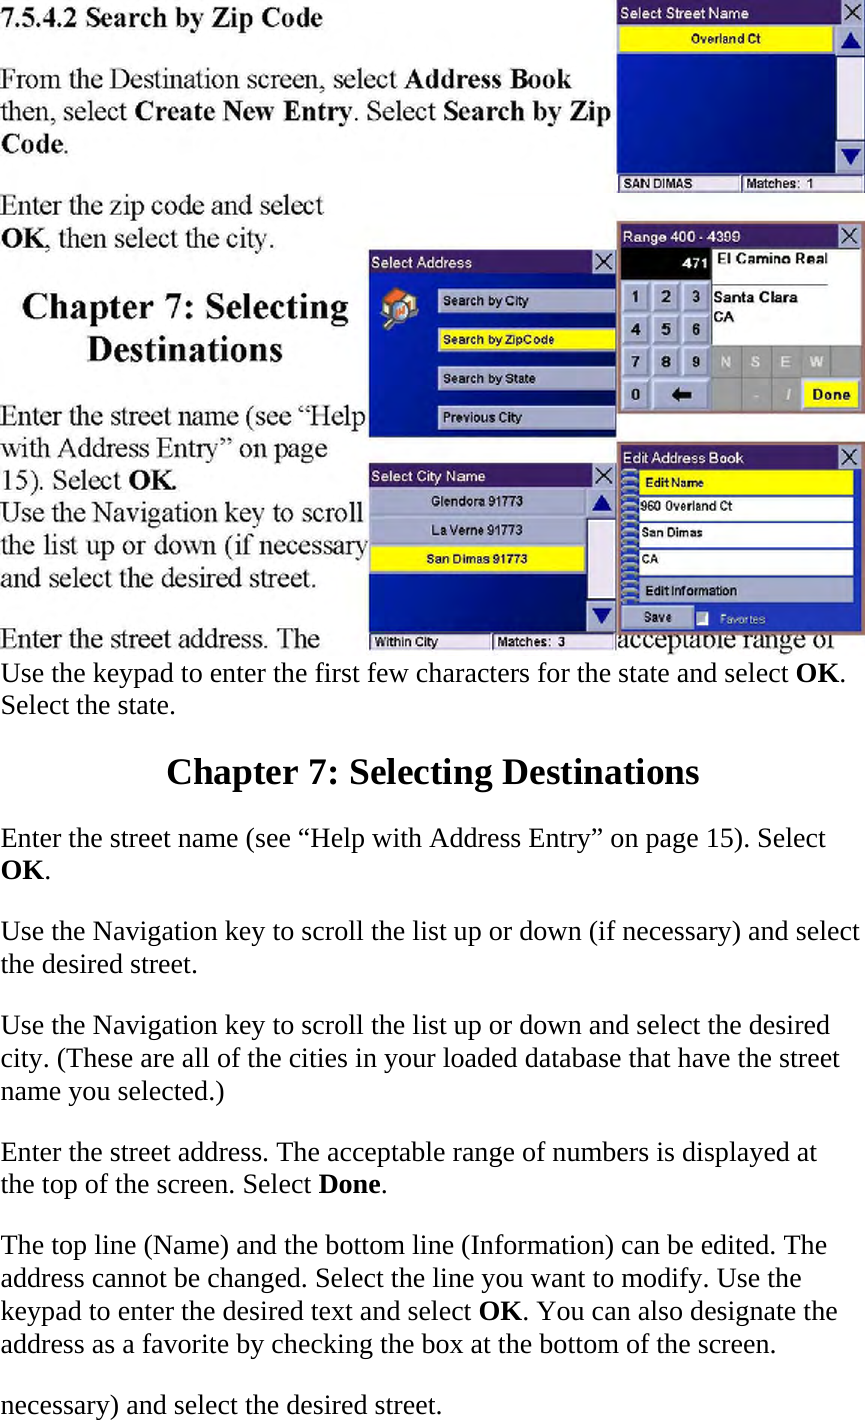  Use the keypad to enter the first few characters for the state and select OK. Select the state.  Chapter 7: Selecting Destinations  Enter the street name (see “Help with Address Entry” on page 15). Select OK.  Use the Navigation key to scroll the list up or down (if necessary) and select the desired street.  Use the Navigation key to scroll the list up or down and select the desired city. (These are all of the cities in your loaded database that have the street name you selected.)  Enter the street address. The acceptable range of numbers is displayed at the top of the screen. Select Done.  The top line (Name) and the bottom line (Information) can be edited. The address cannot be changed. Select the line you want to modify. Use the keypad to enter the desired text and select OK. You can also designate the address as a favorite by checking the box at the bottom of the screen.  necessary) and select the desired street.  